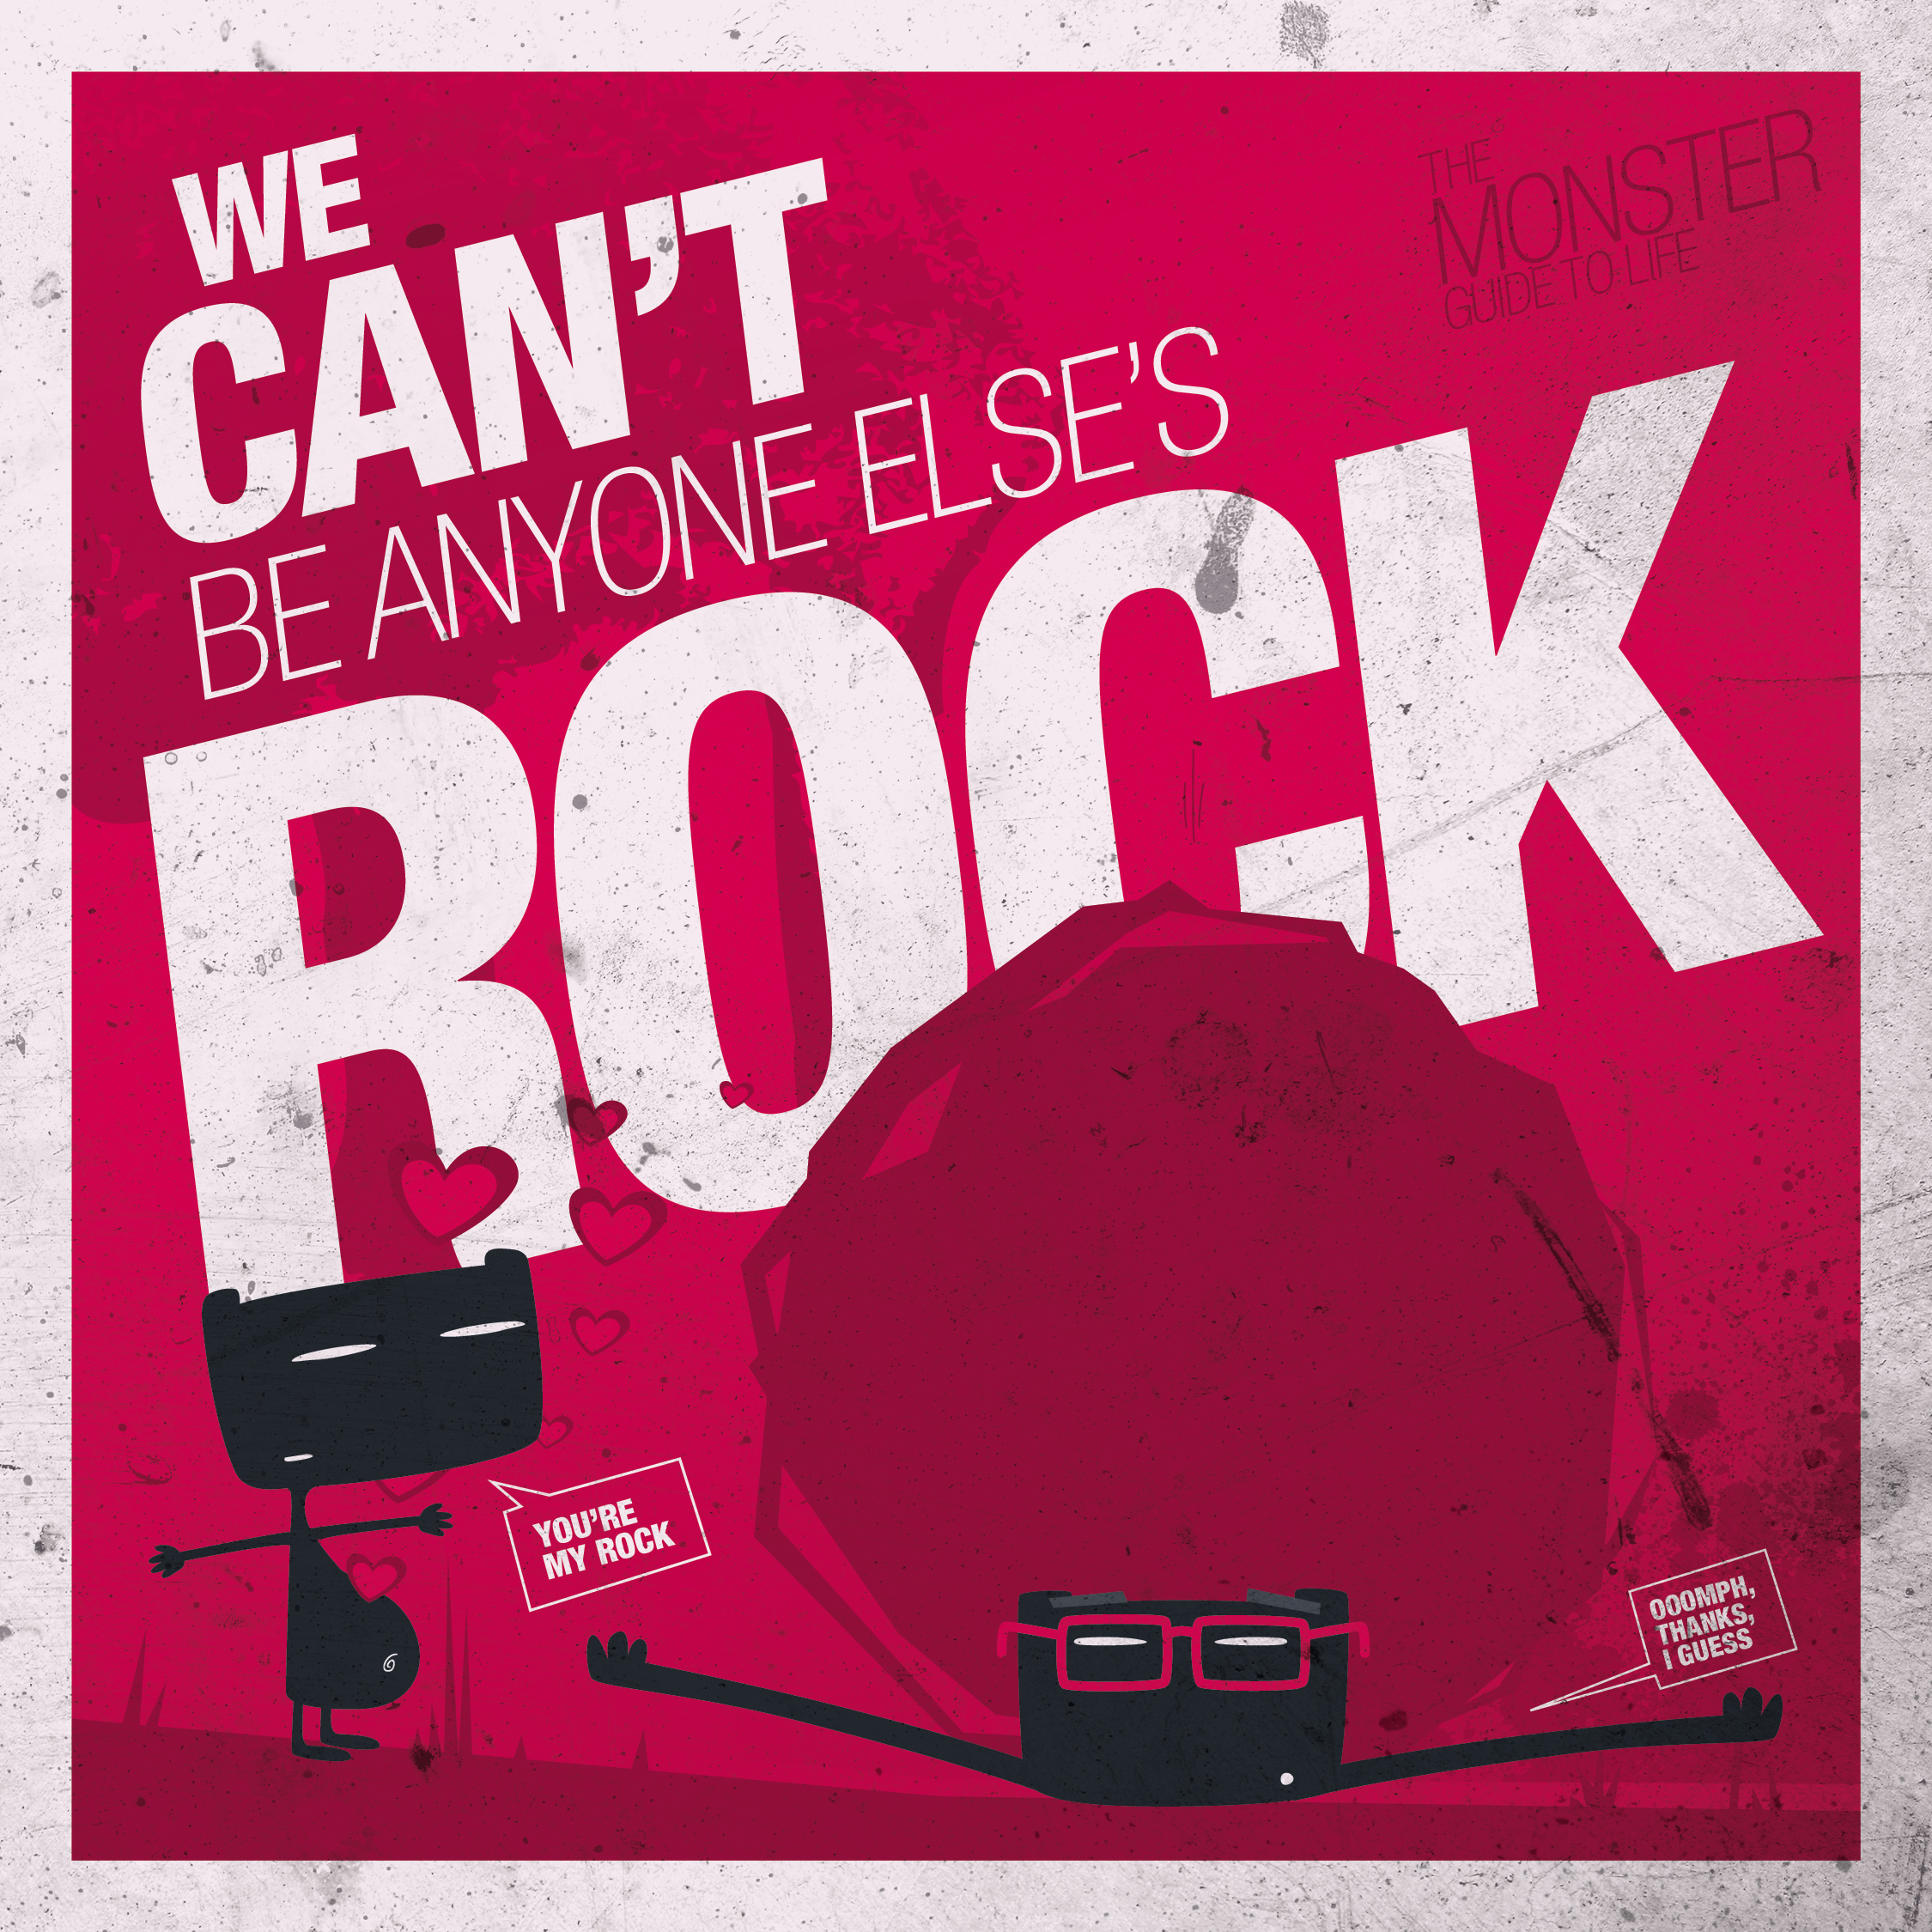 We can't be anyone else's rock